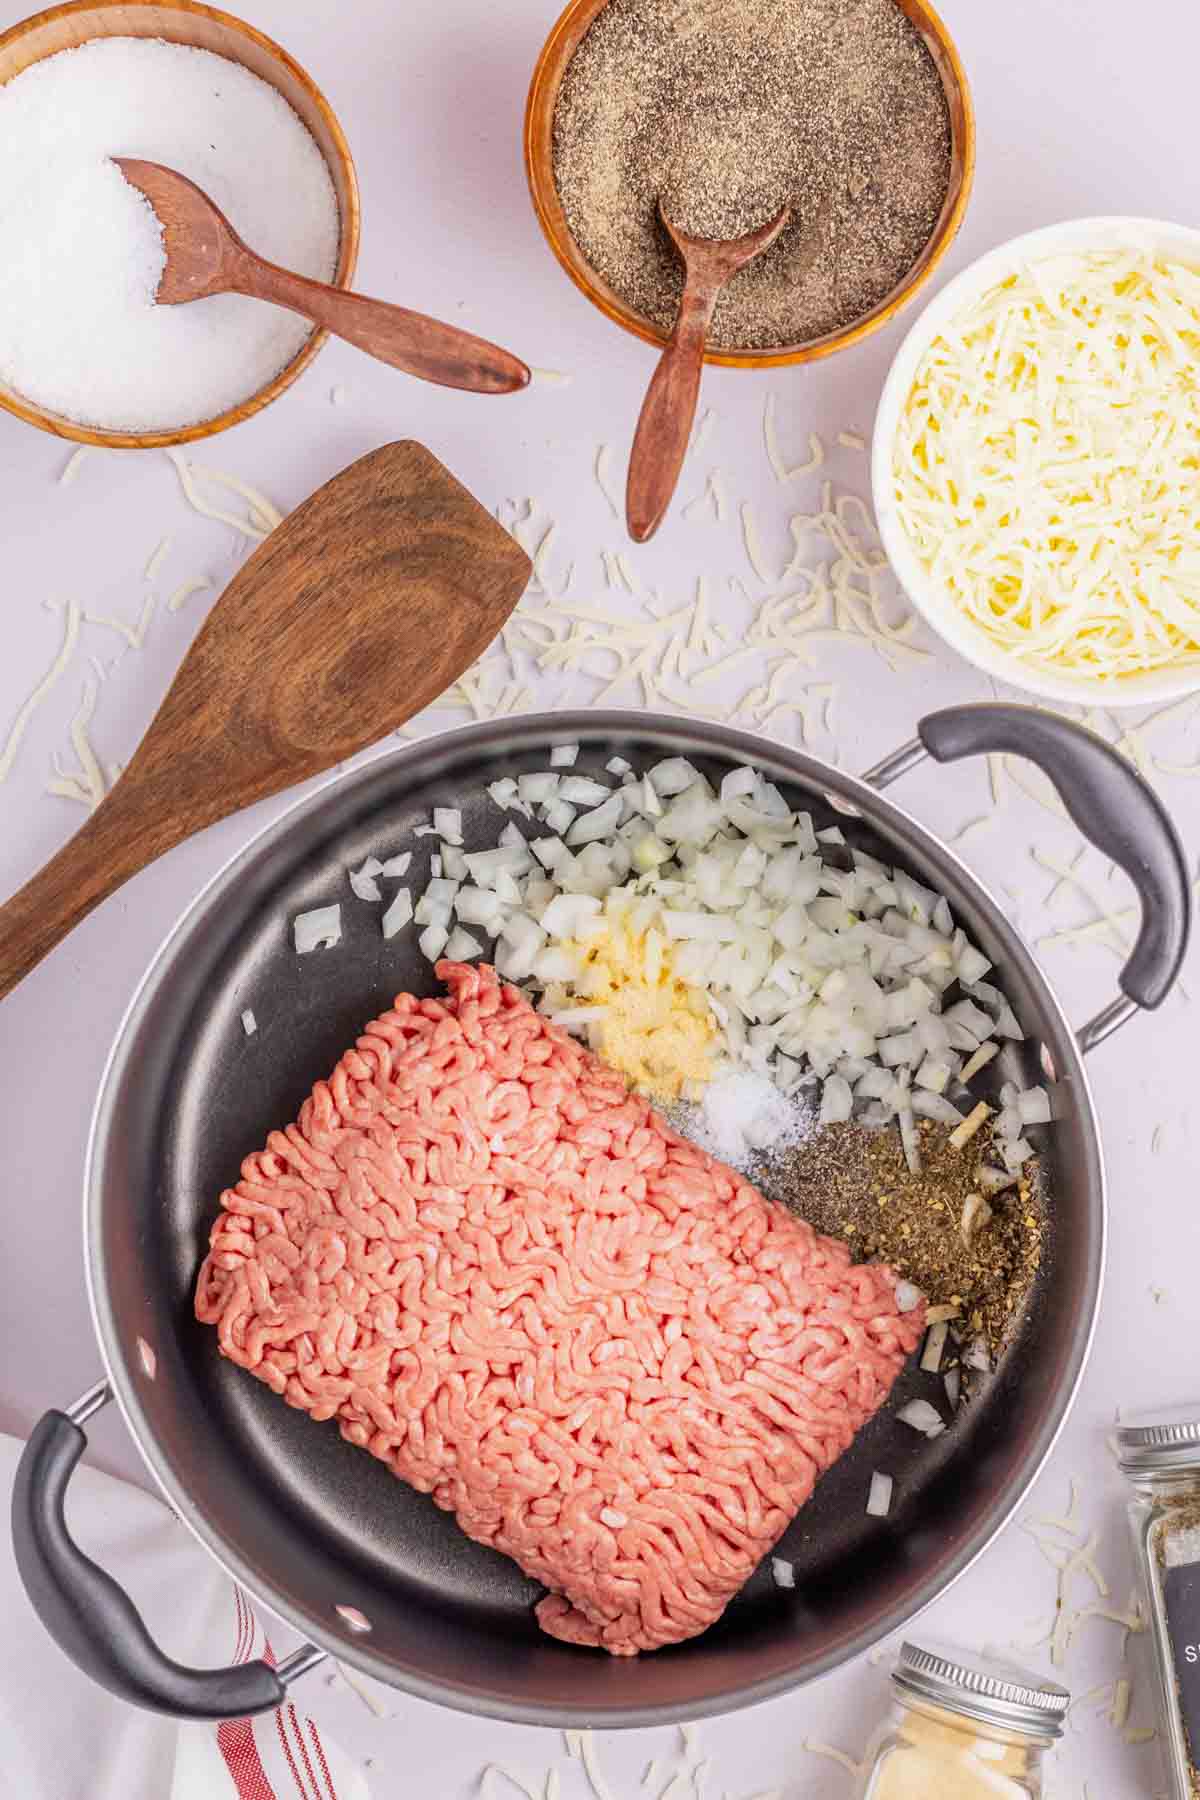 raw ground beef, diced onions and seasonings in a skillet